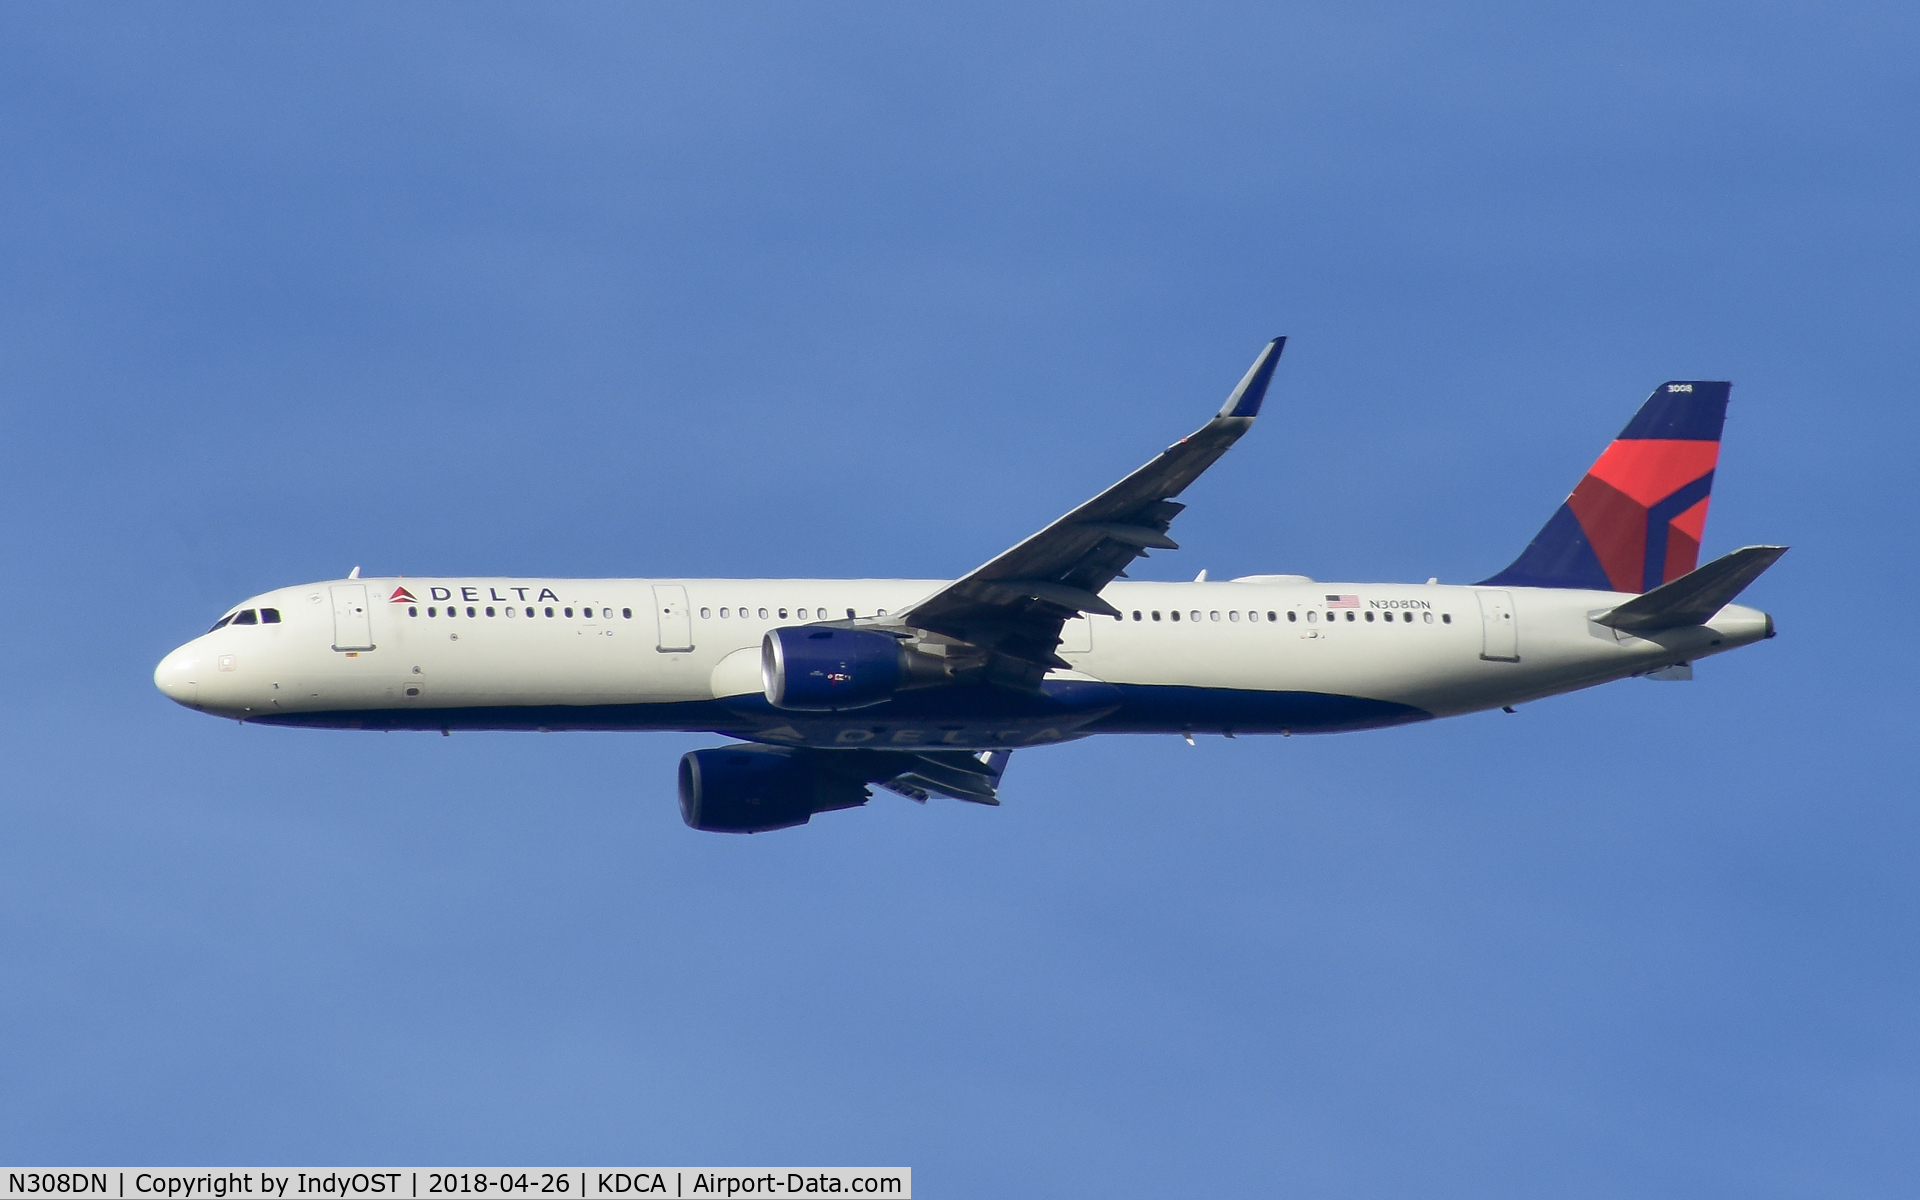 N308DN, 2016 Airbus A321-211 C/N 7233, Delta Airbus A321 taking off out of Washington Reagan on 26 Apr 2018.